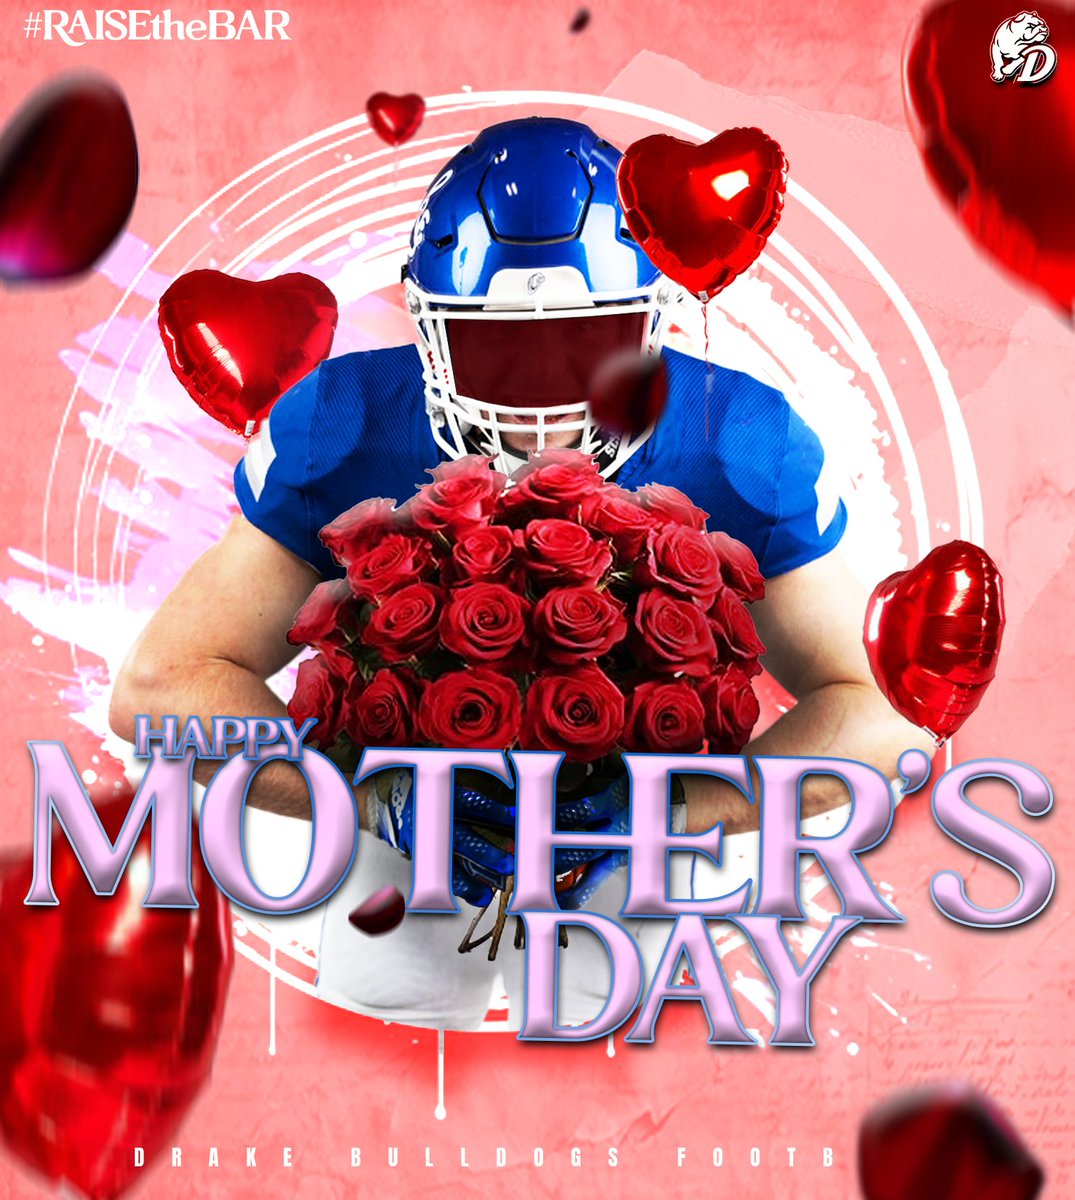 To ALL the Mom's out there, HAPPY MOTHER'S DAY!!! #RAISEtheBAR #TheREALMVPS